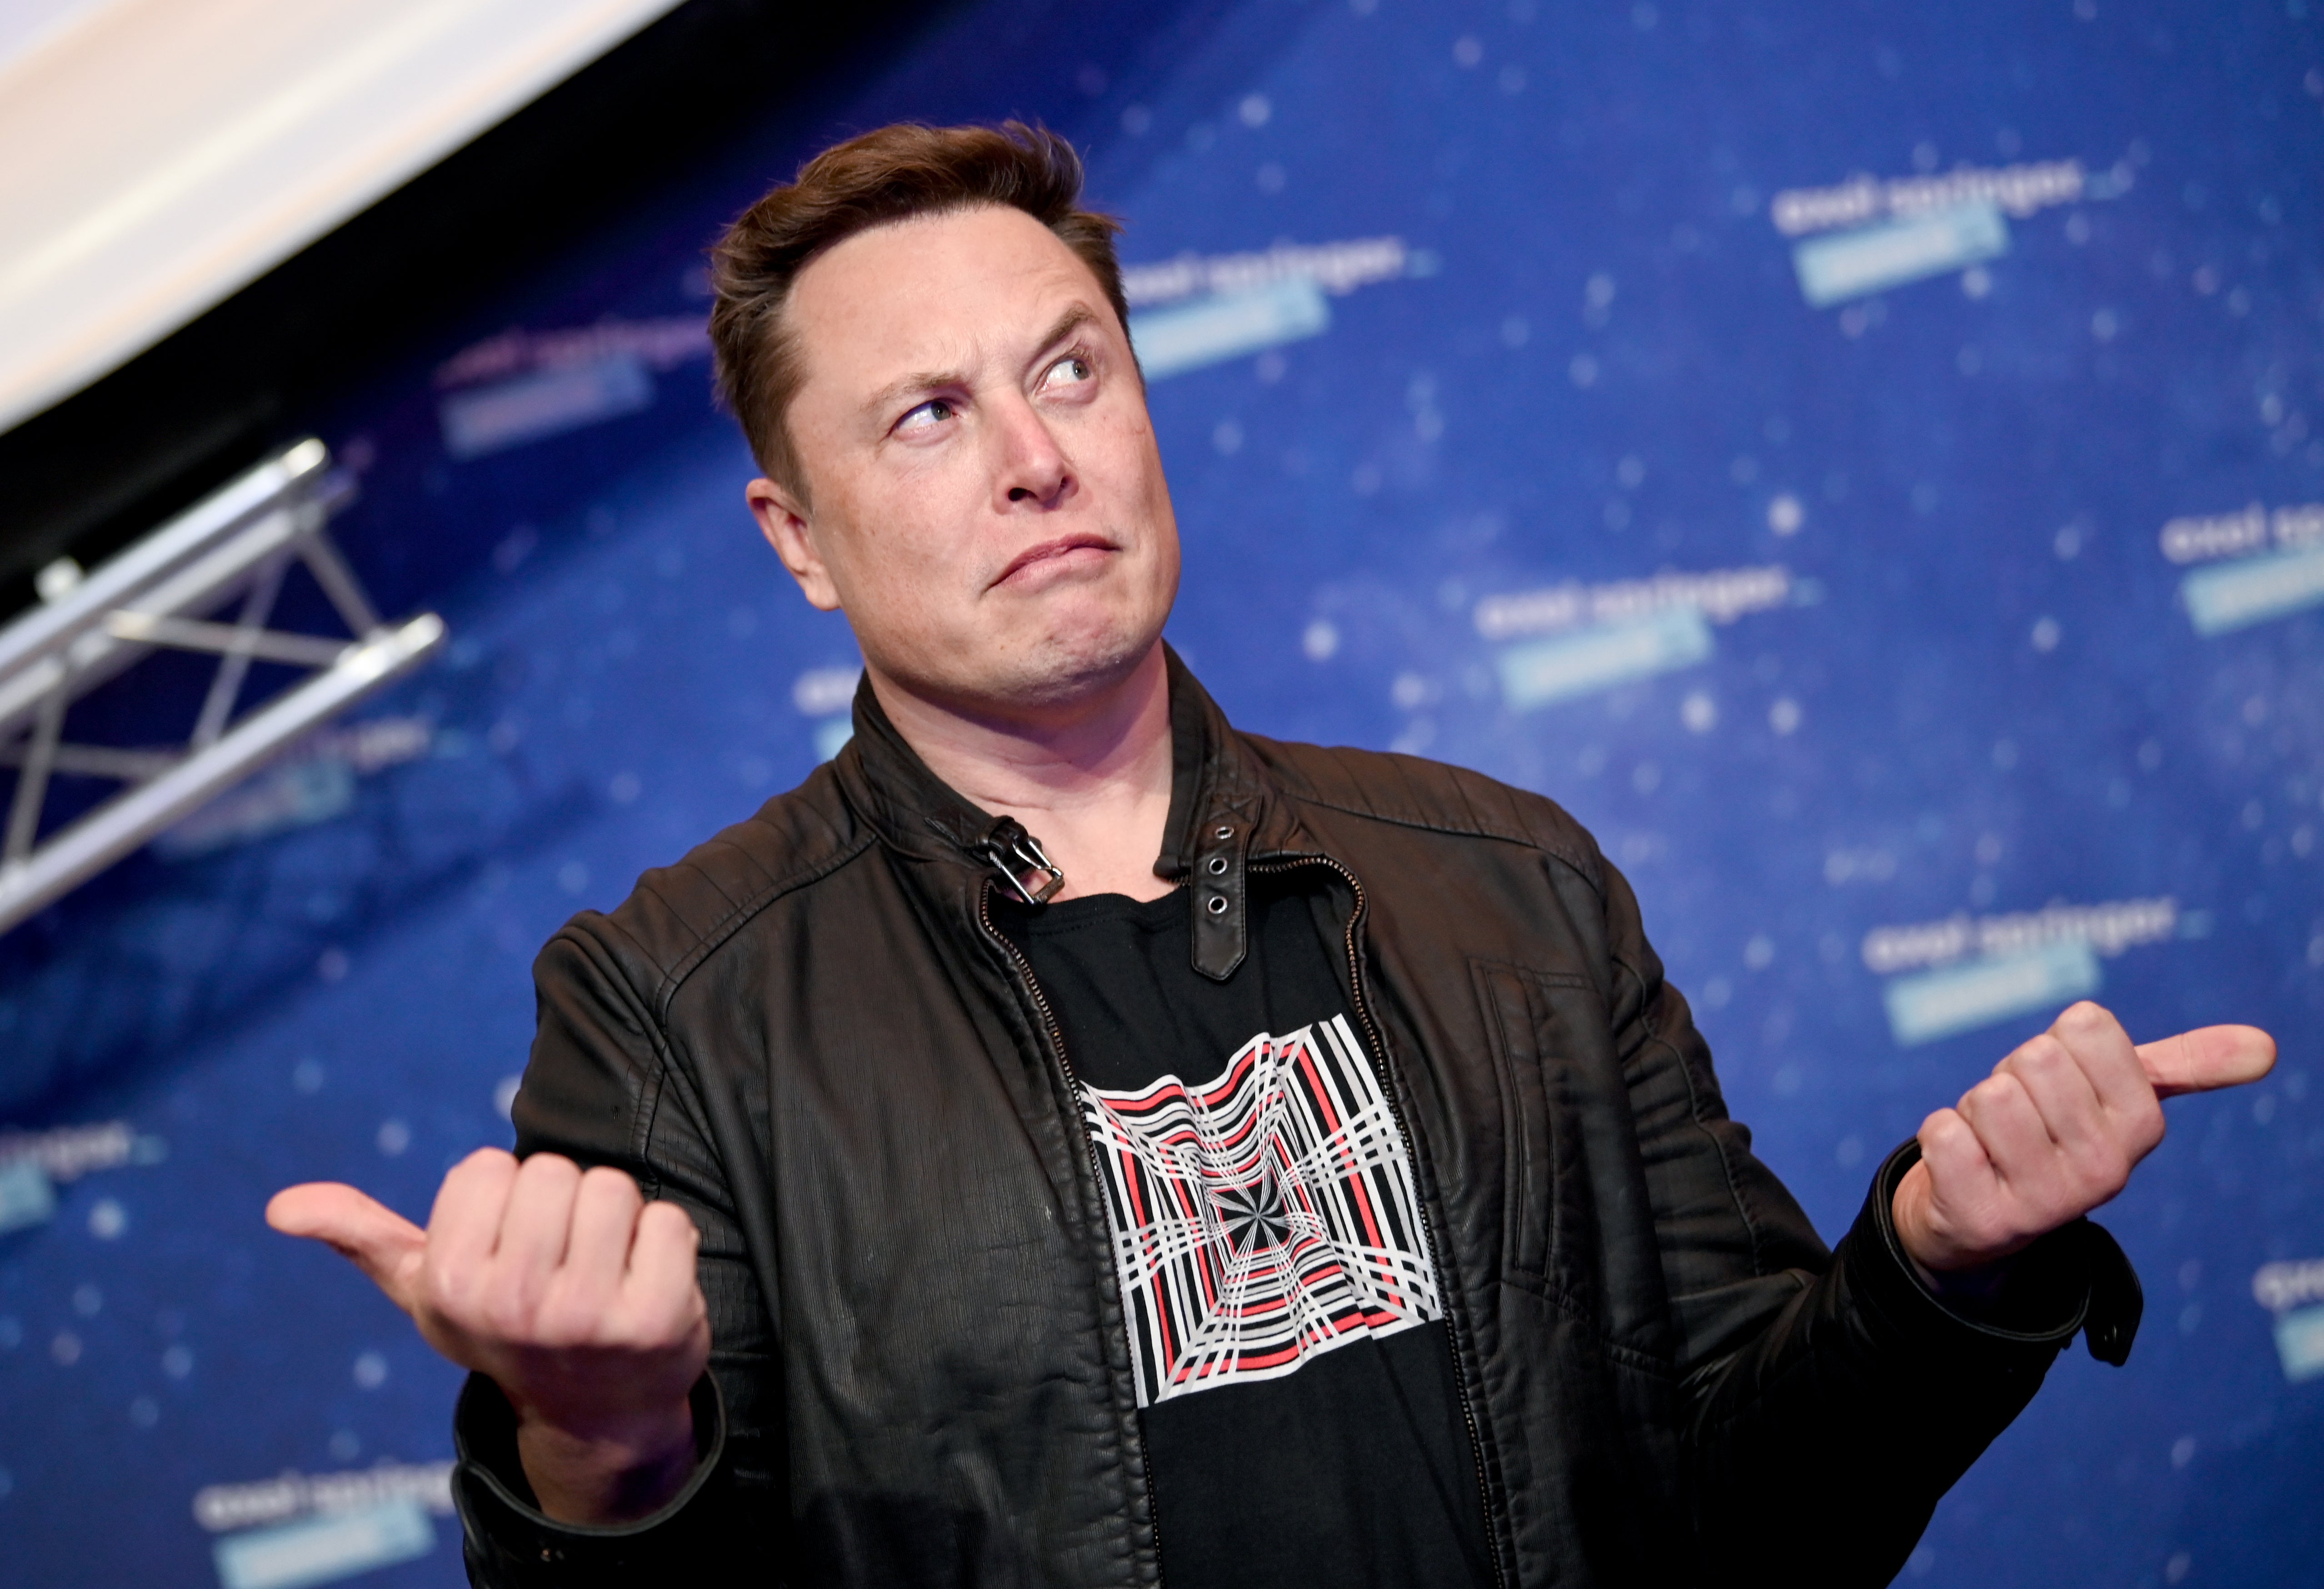 Mr Musk faces obstacles to his bid to acquire Twitter.